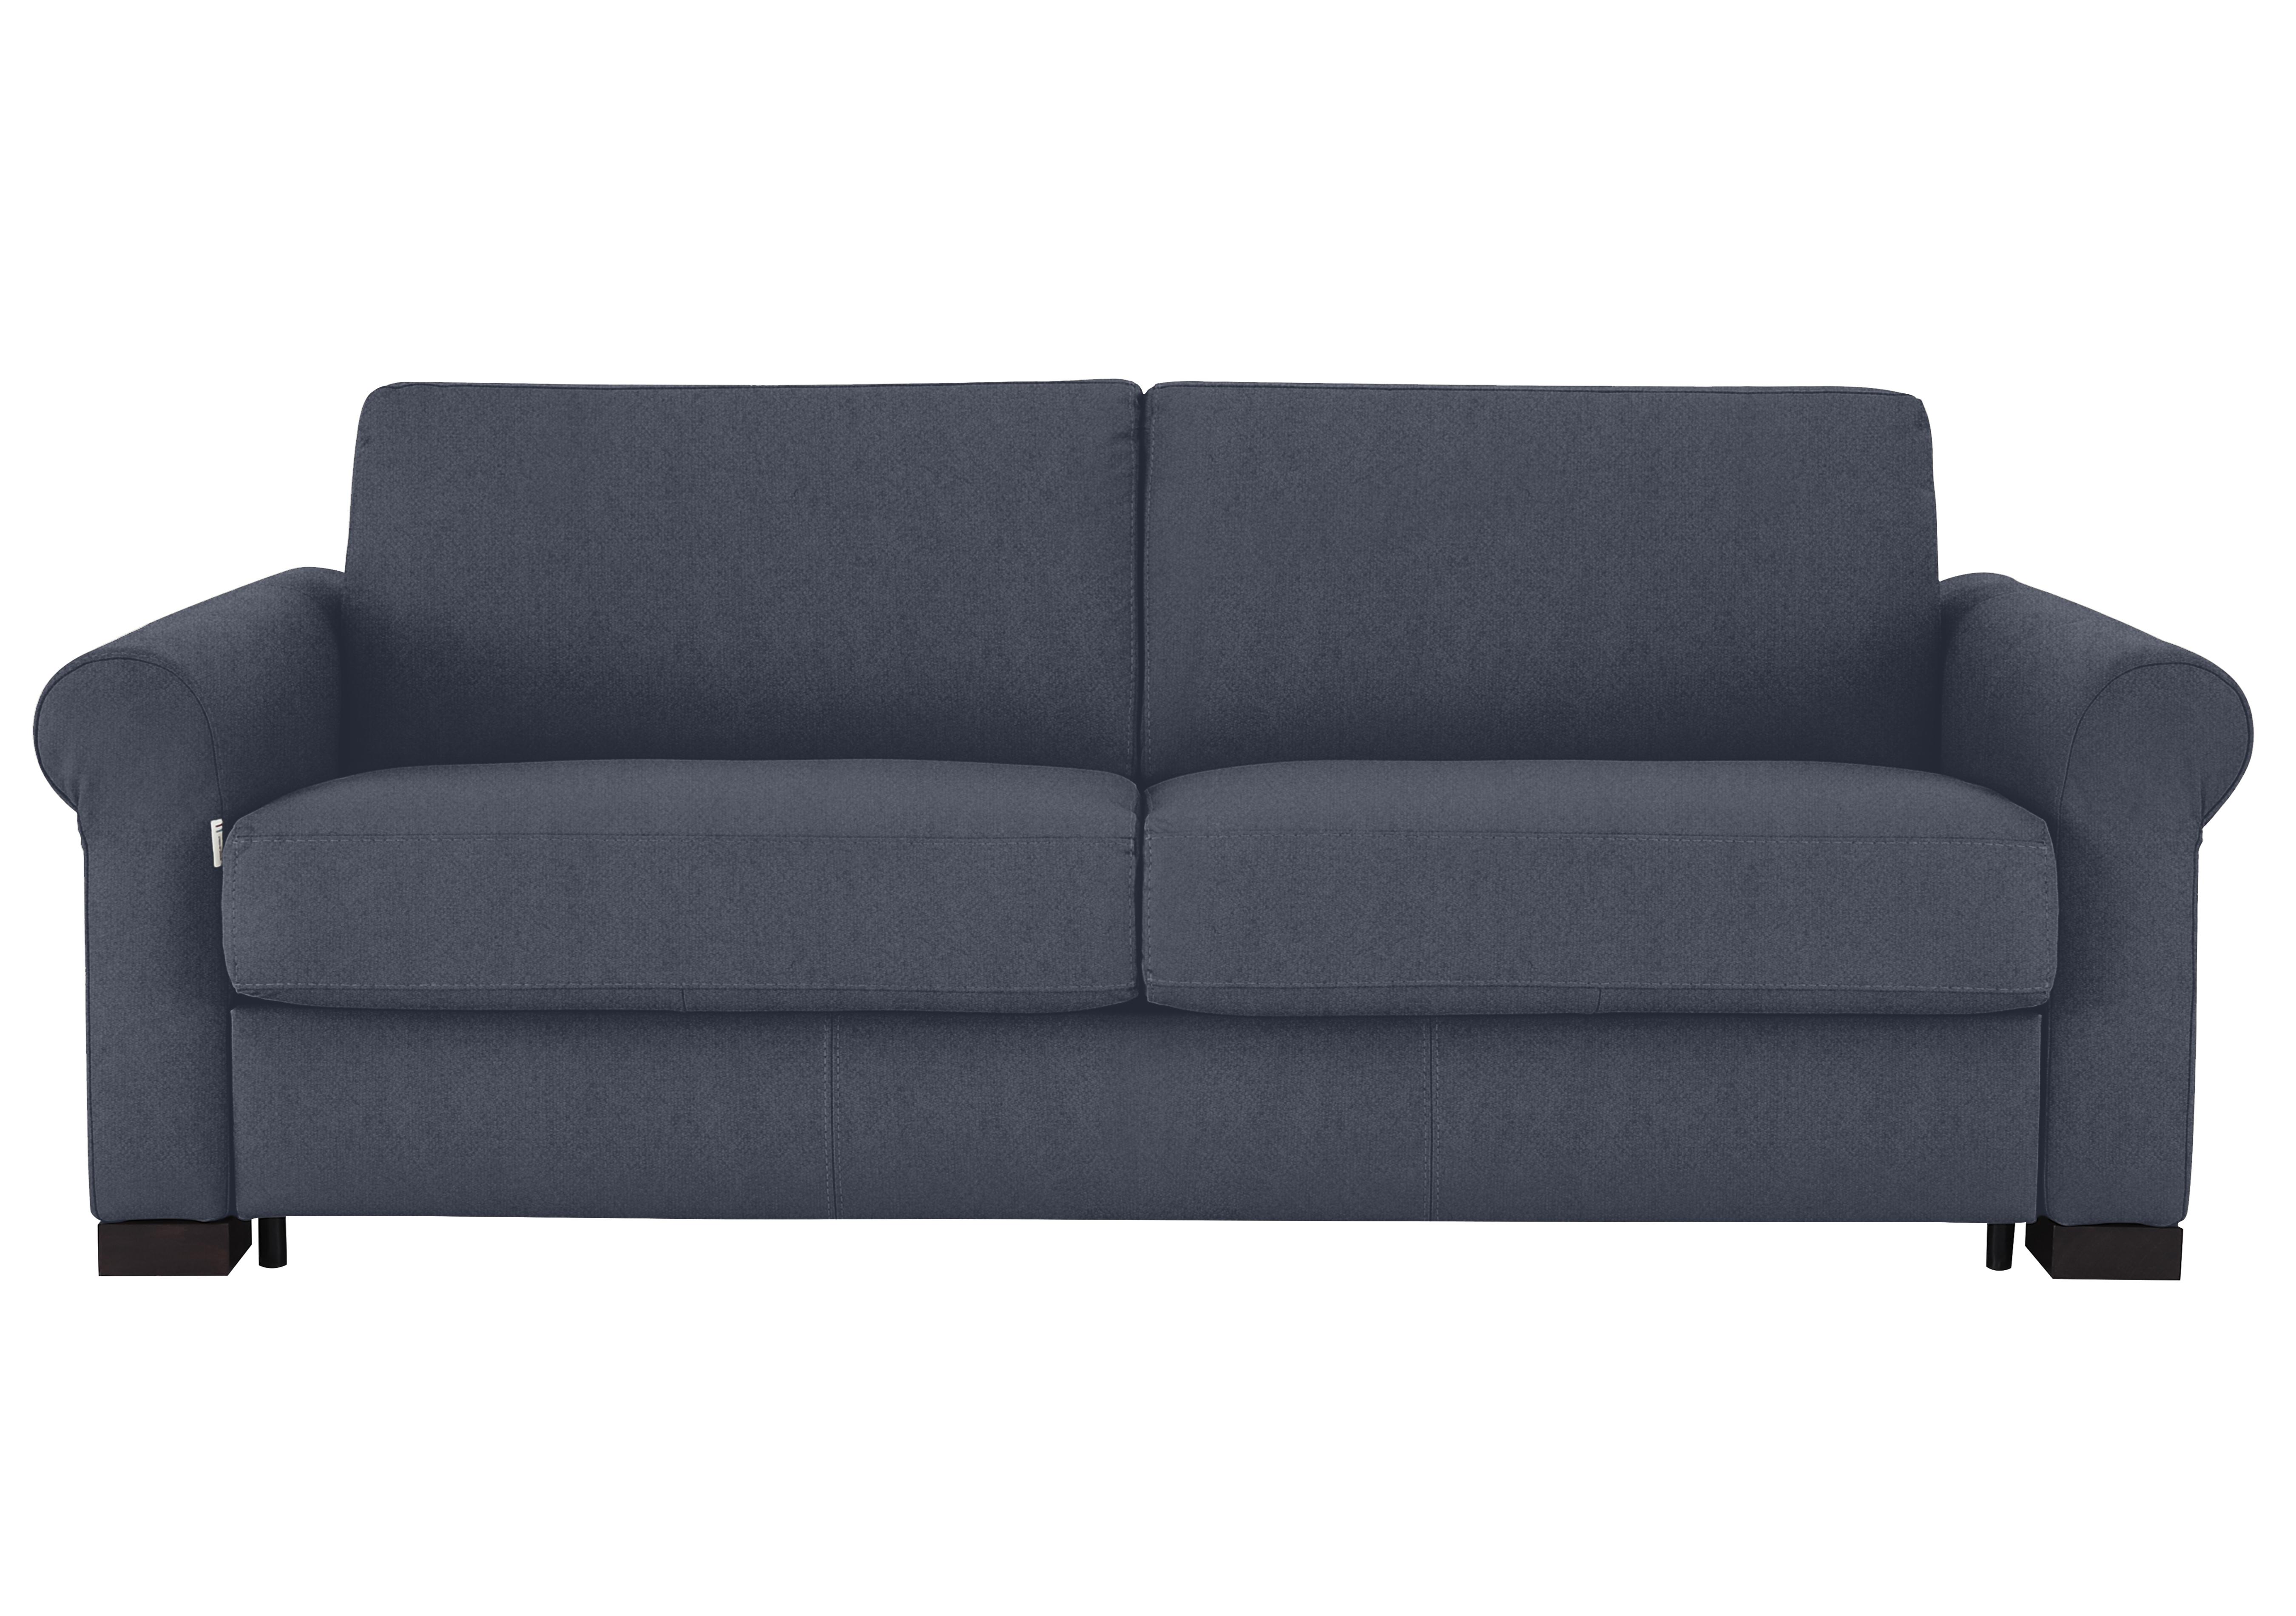 Alcova 3 Seater Fabric Sofa Bed with Scroll Arms in Fuente Ocean on Furniture Village